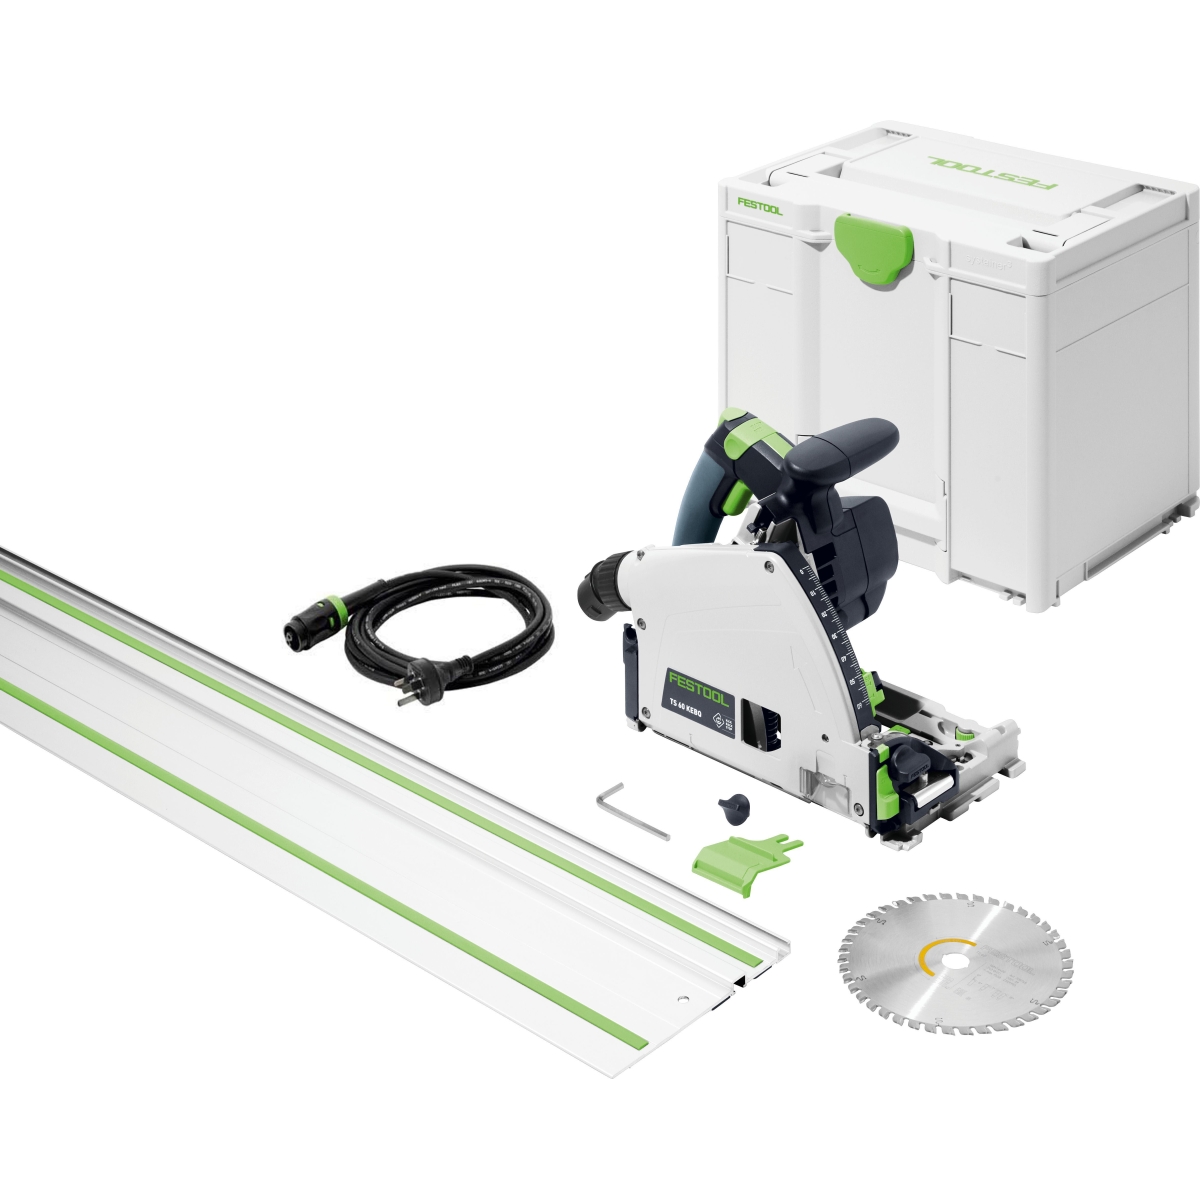 Festool TS 60K 168mm Plunge Cut Saw in Systainer with 1400mm Rail